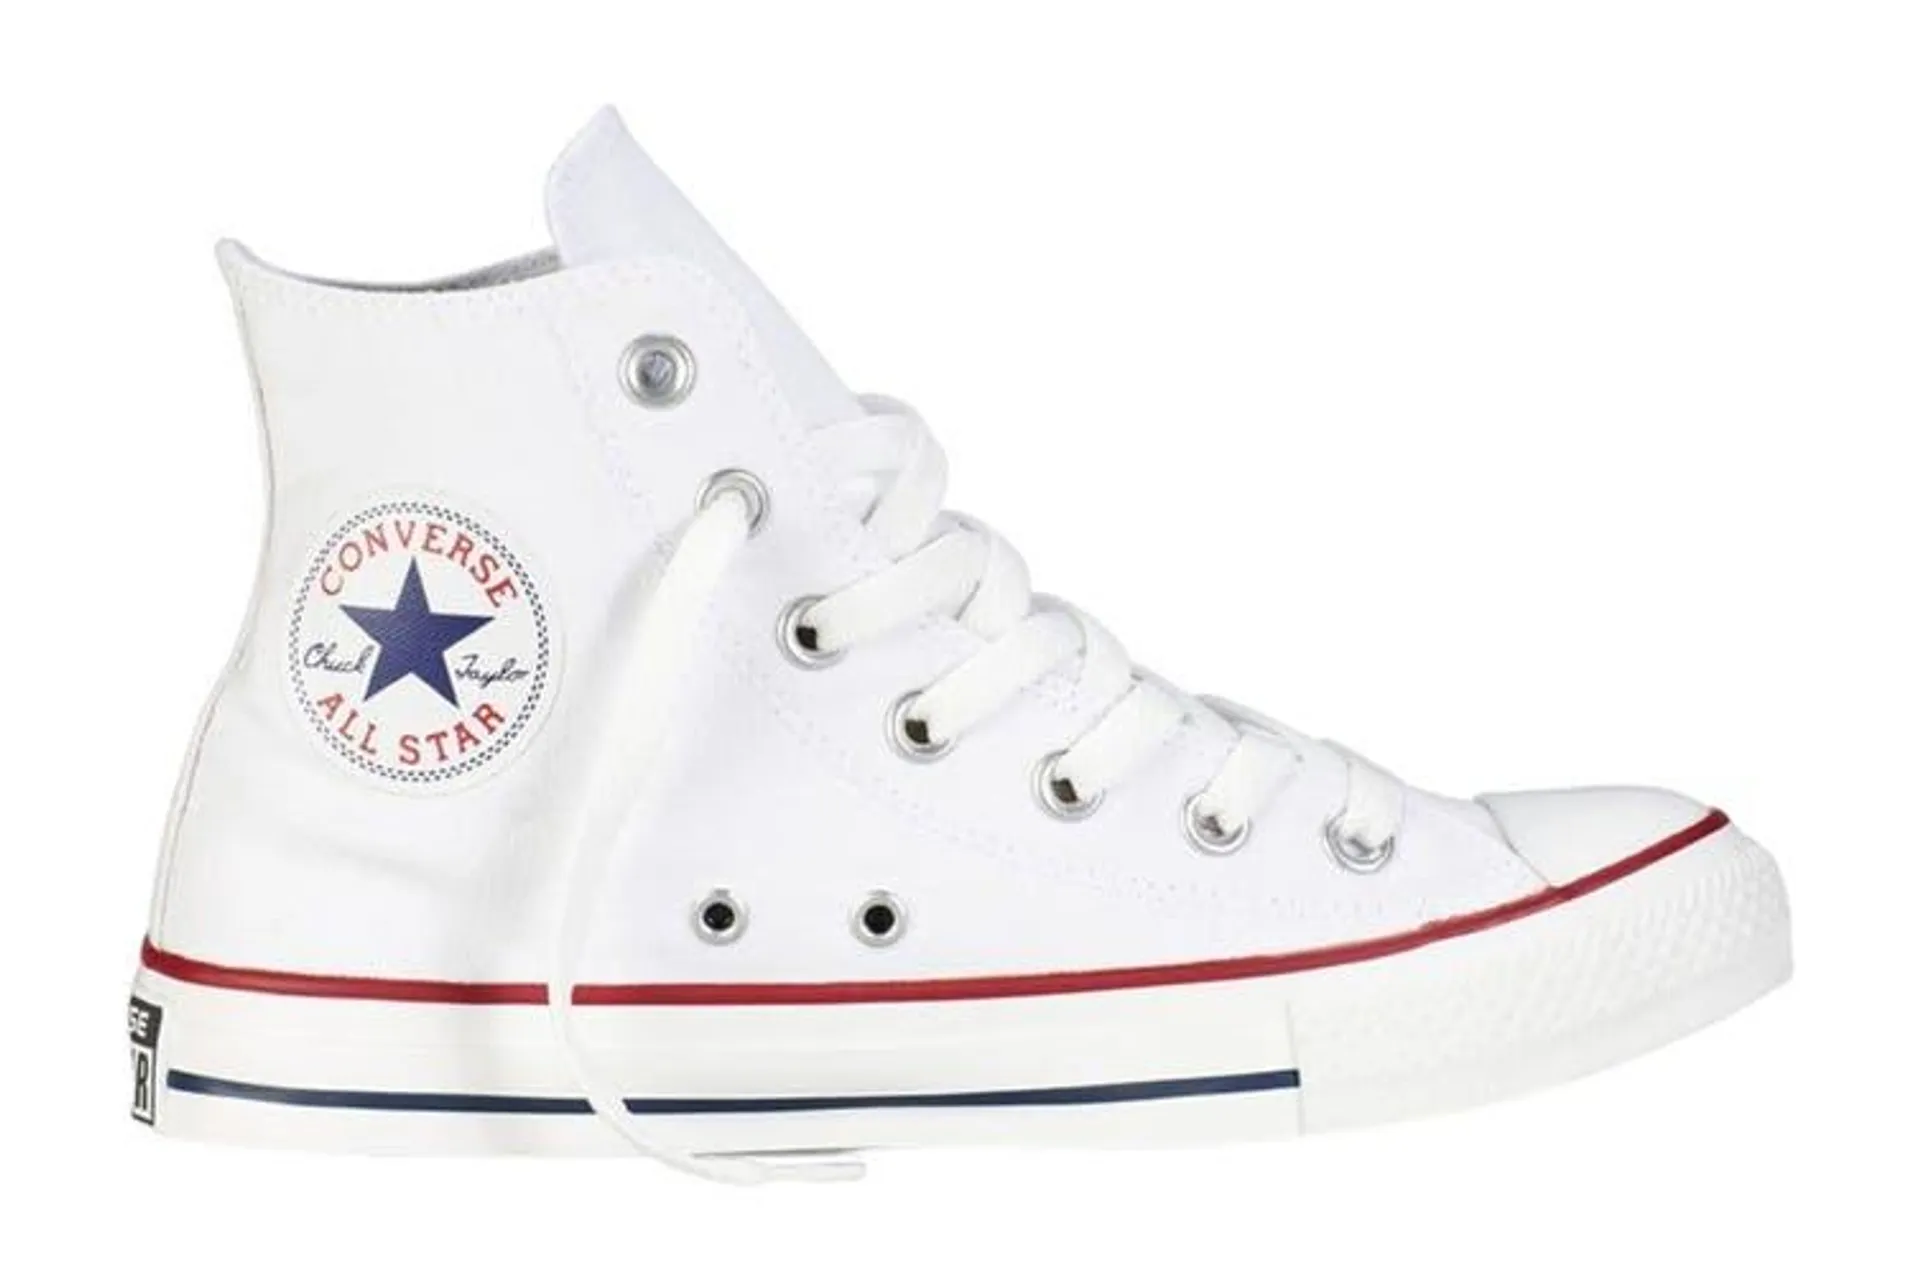 Converse Chuck Taylor All Star Hi Casual Shoes (Optical White, Size 11M/13W US)